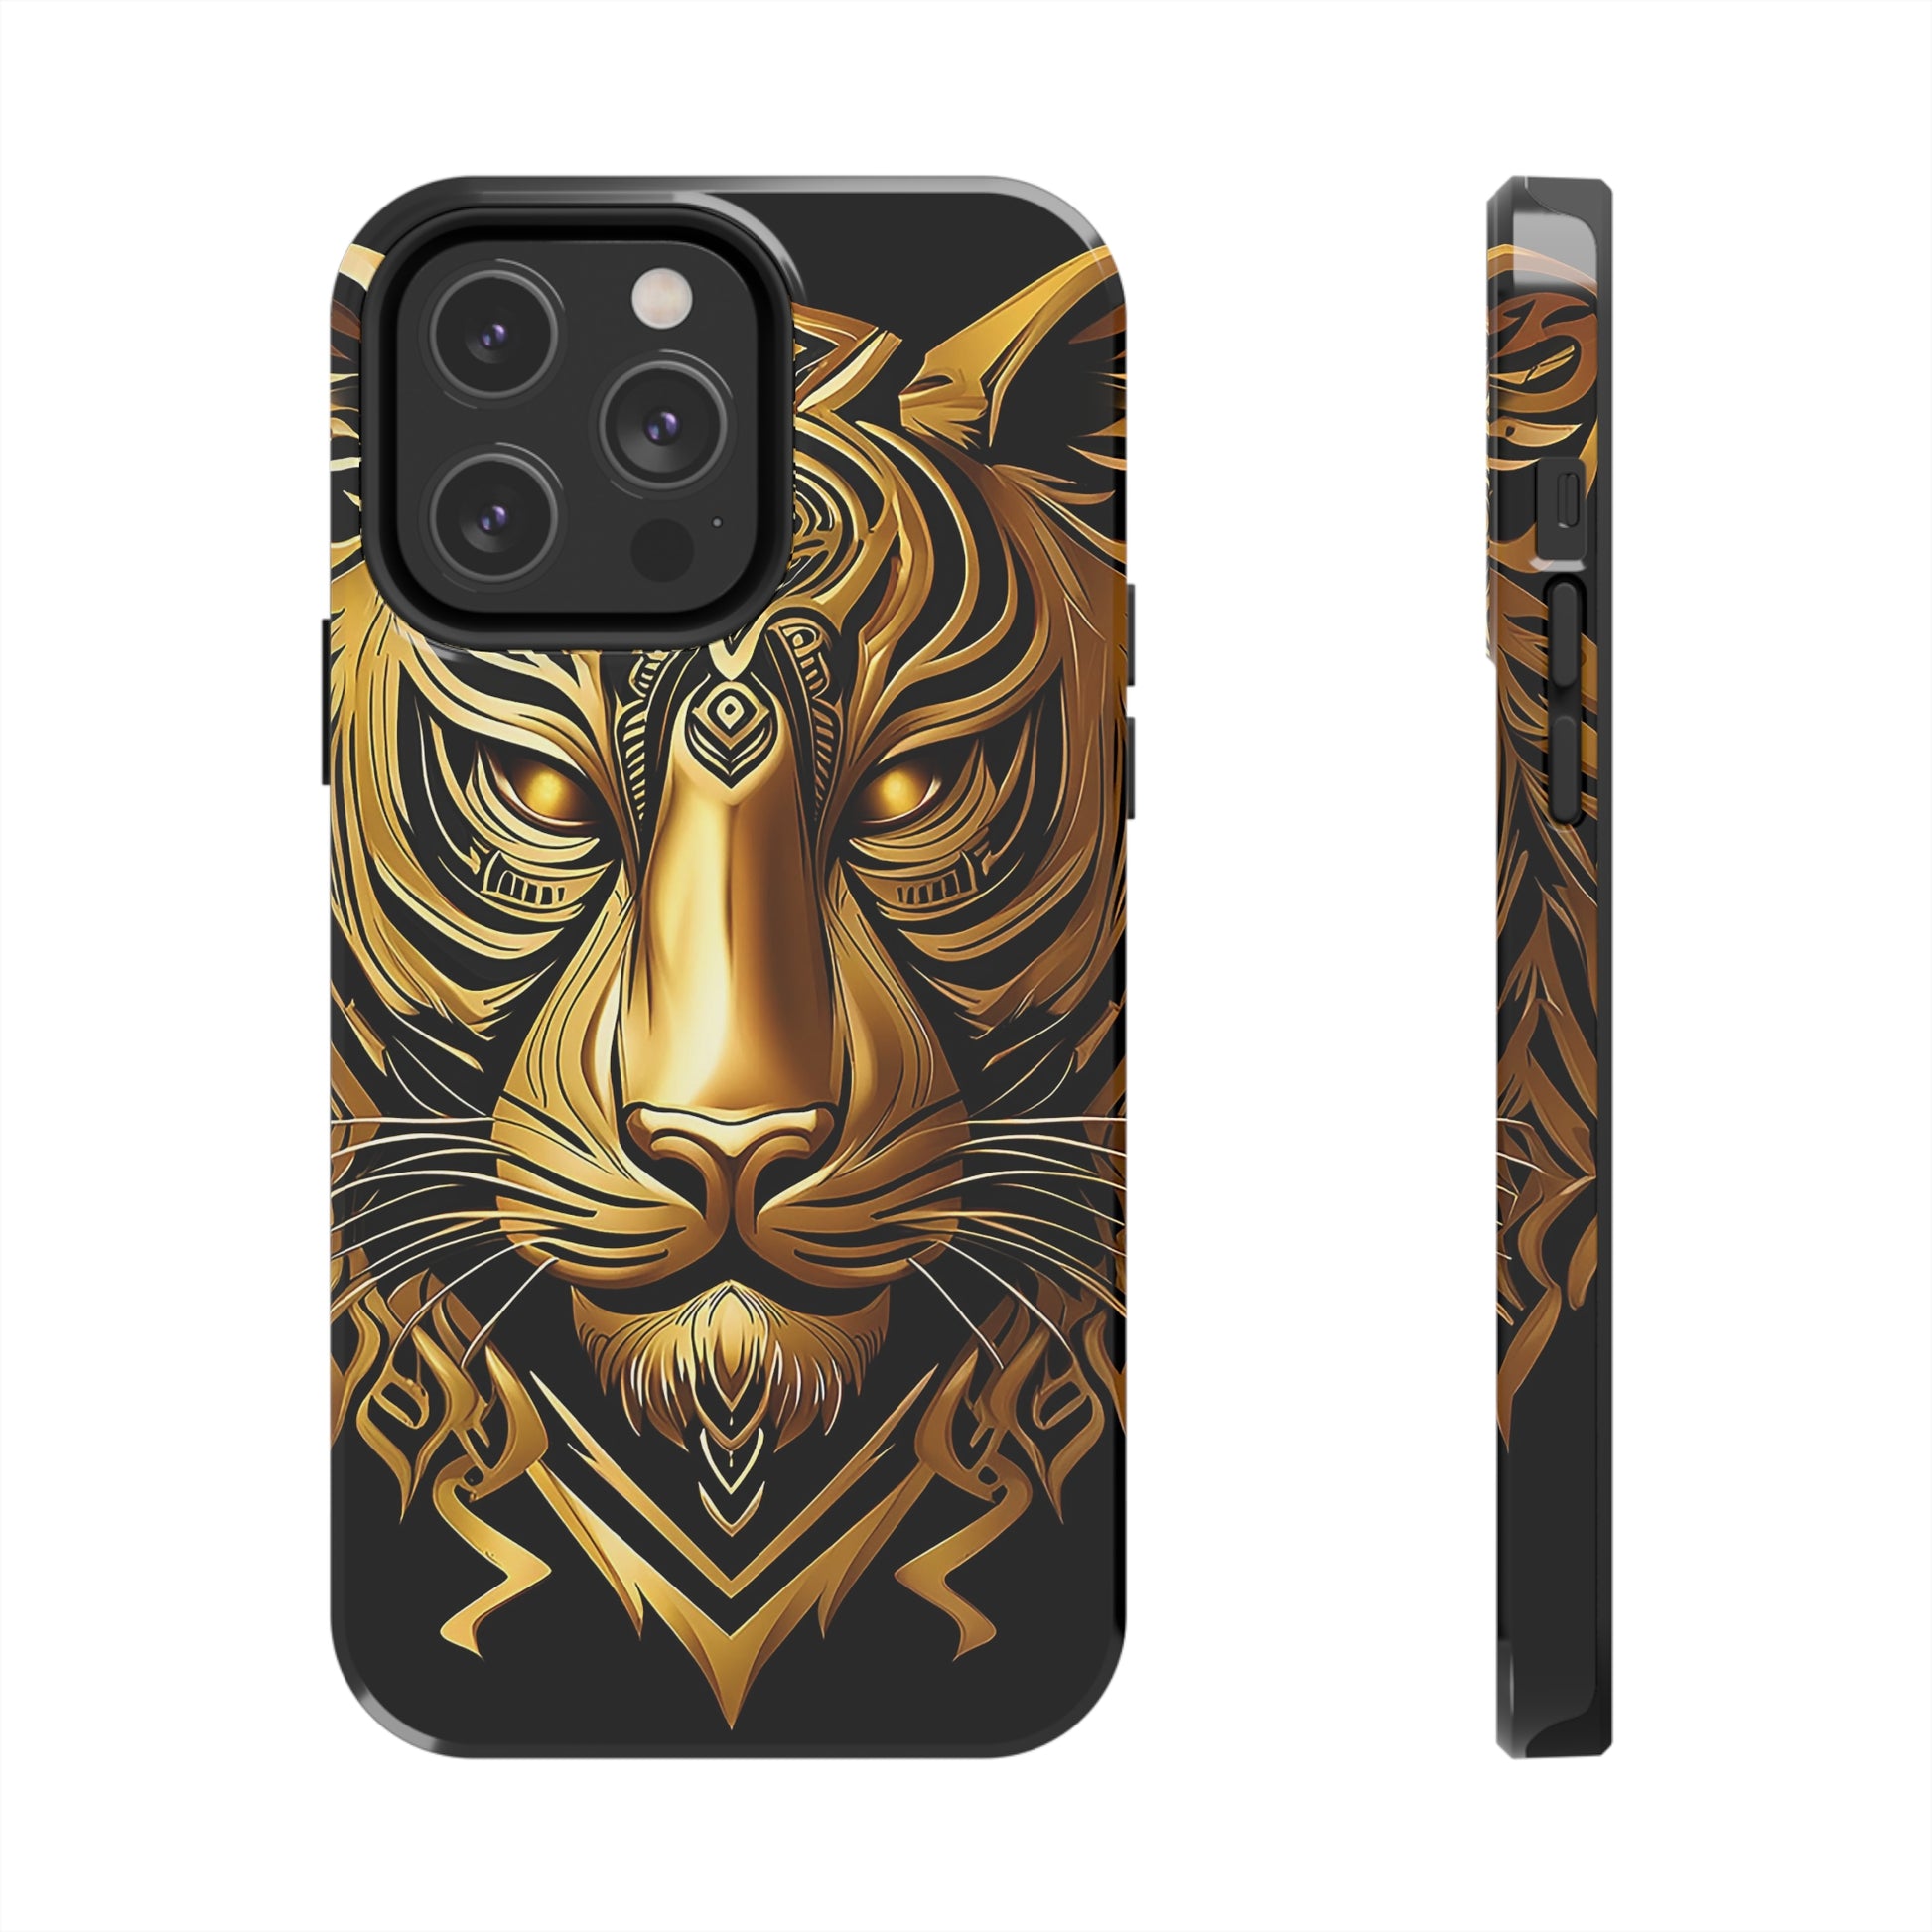 Big Cat Themed iPhone 14 Tough Case - Gold Tribal Tiger Head Printed on Phone Case for iPhone 14 Pro Max